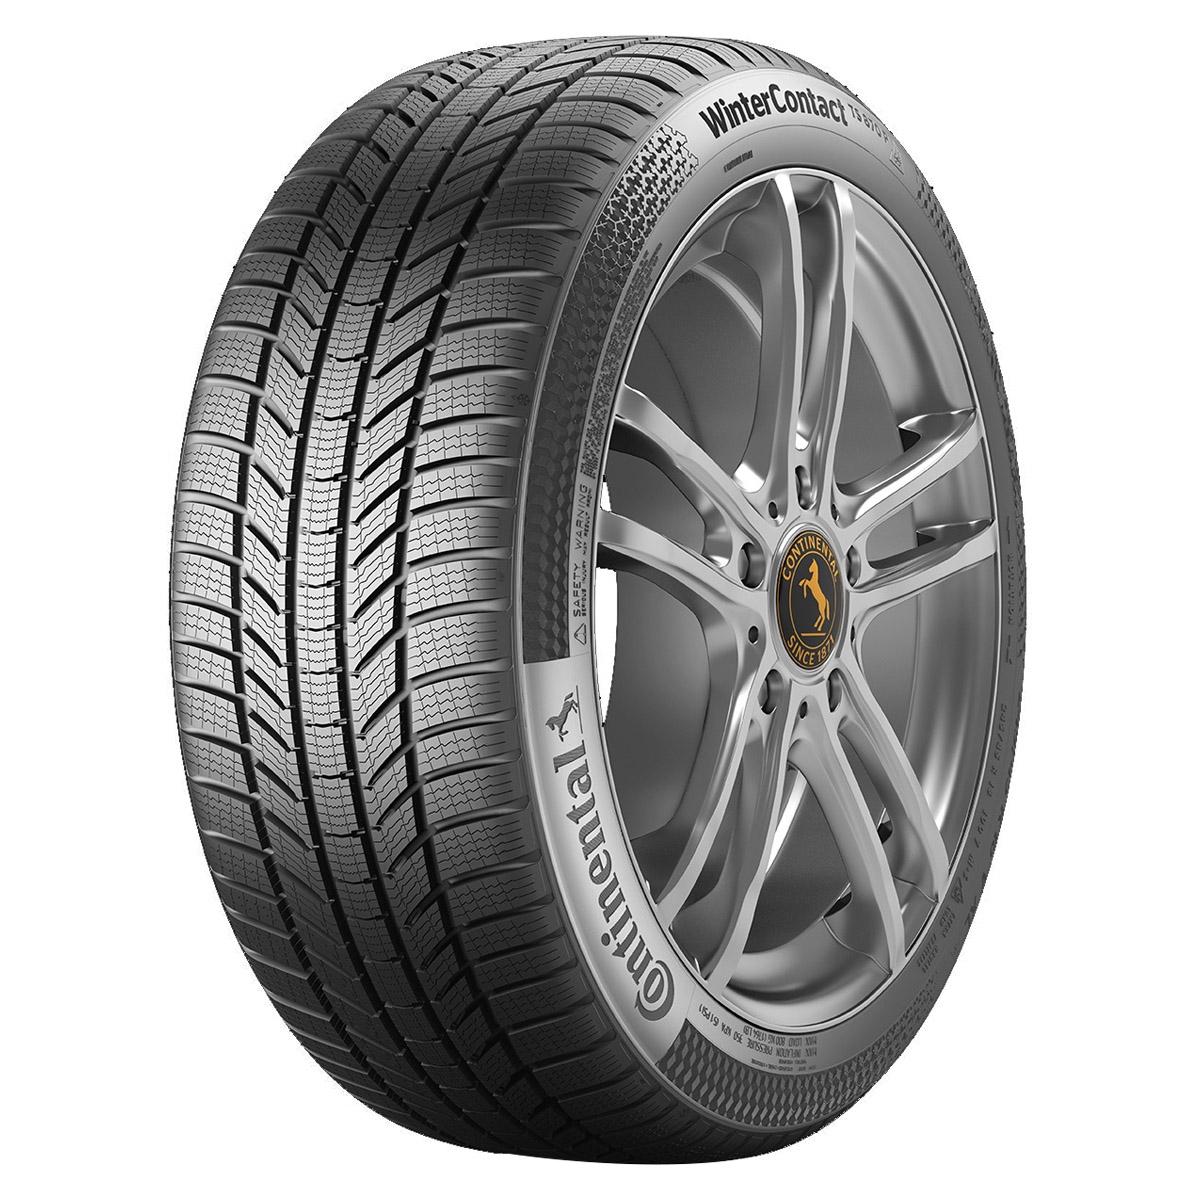 Anvelope iarna CONTINENTAL WINTER CONTACT TS870 P FR 235/55 R19 105H